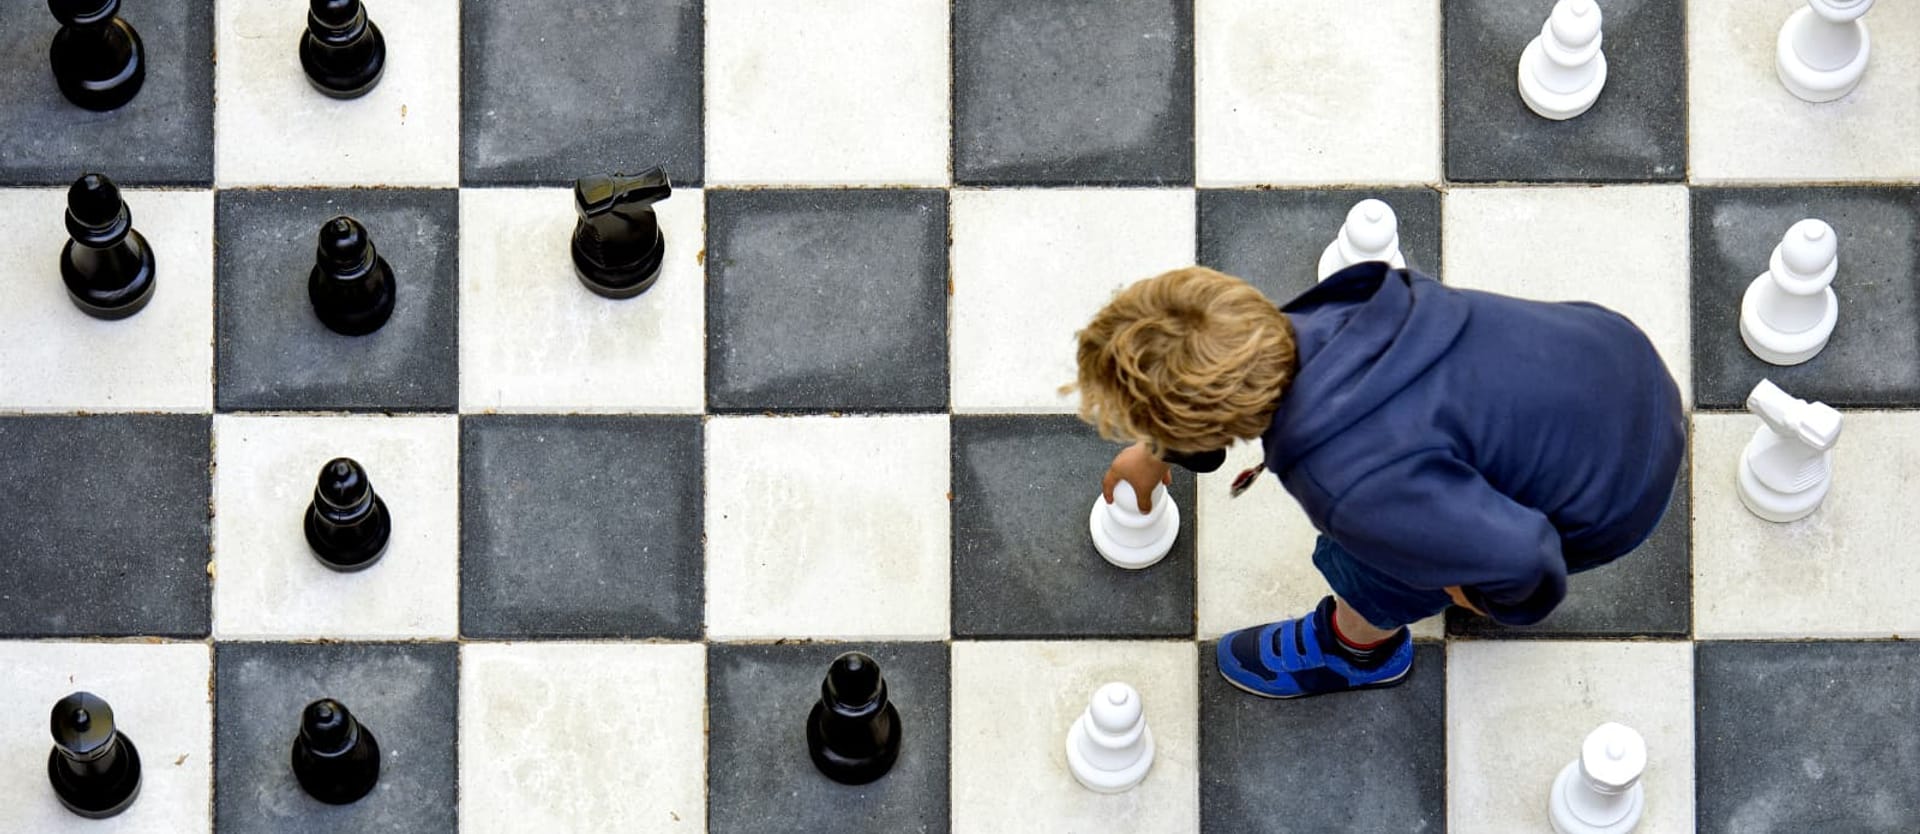 What is the worst game of chess you have ever played? - Quora